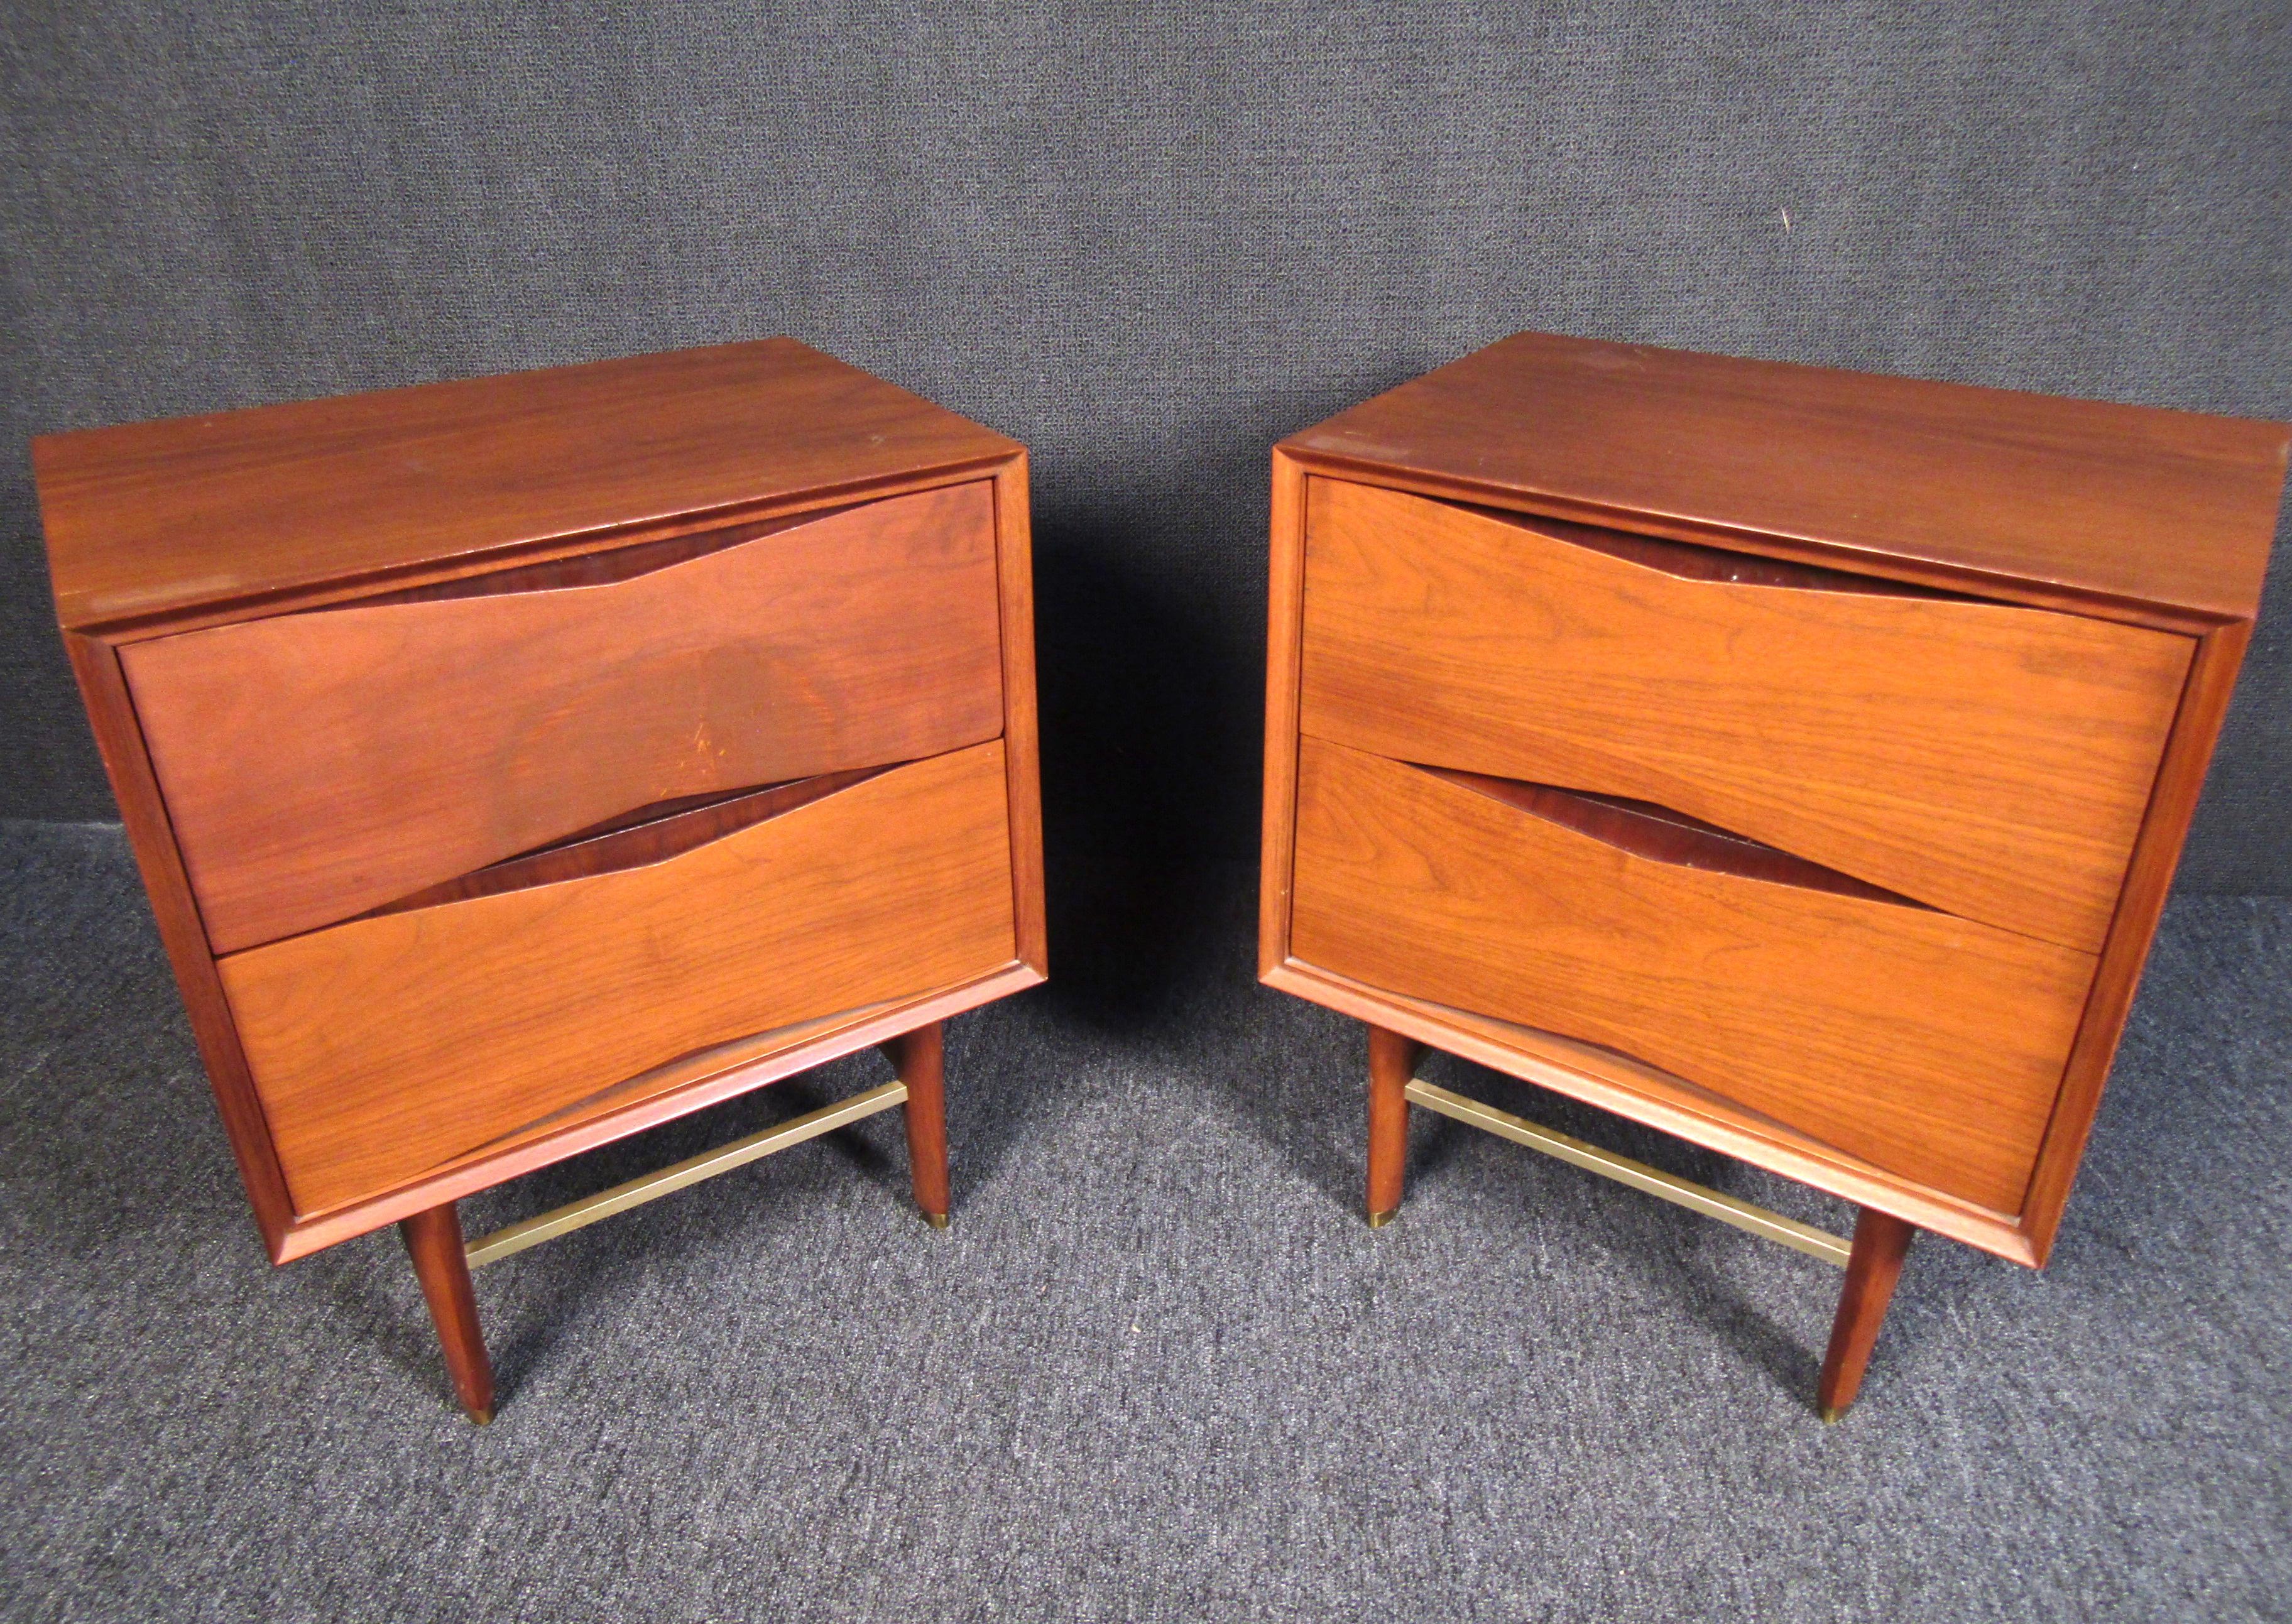 A beautiful and minimal pair of Mid-Century Modern walnut nightstands with brass accents. Perfect for adding midcentury flair to any bedroom, this pair of nightstands features an understated design with tapered legs and brilliant brass accents that